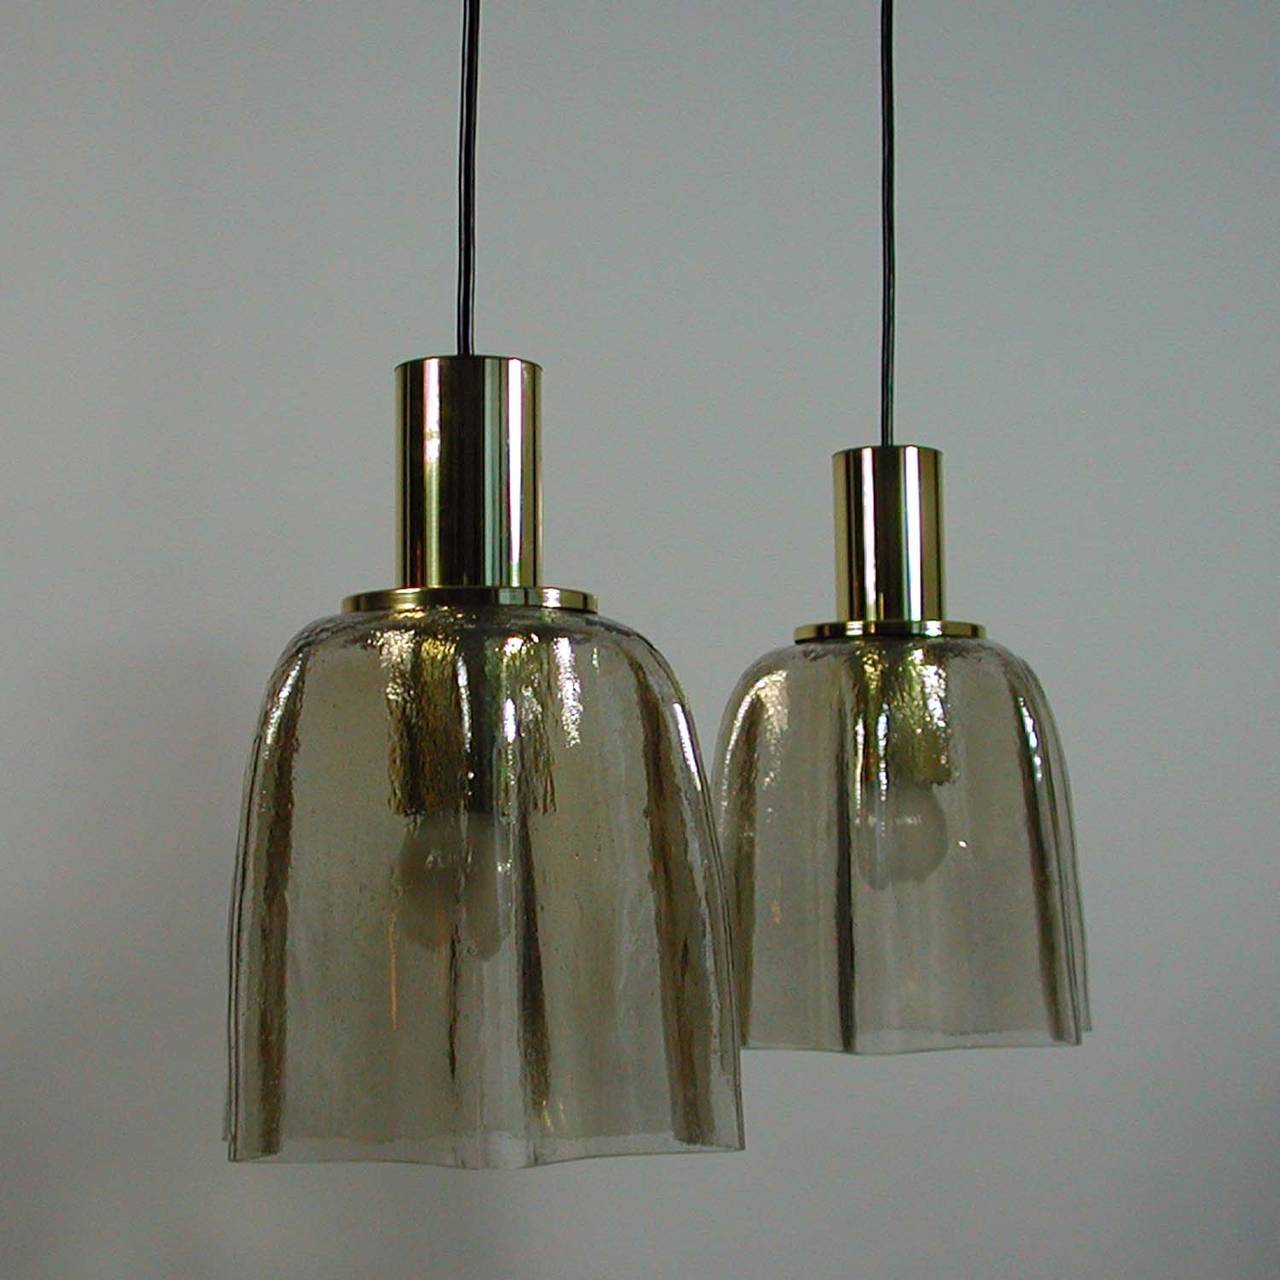 Awesome tinted amber handkerchief ice glass and brass pendant by Limburg. Manufactured in Germany in the 1960s.

The lamp has got a E27 screw on socket each. The glass shade is topped by a brass cylinder.

Measures: Total height with wiring is 52